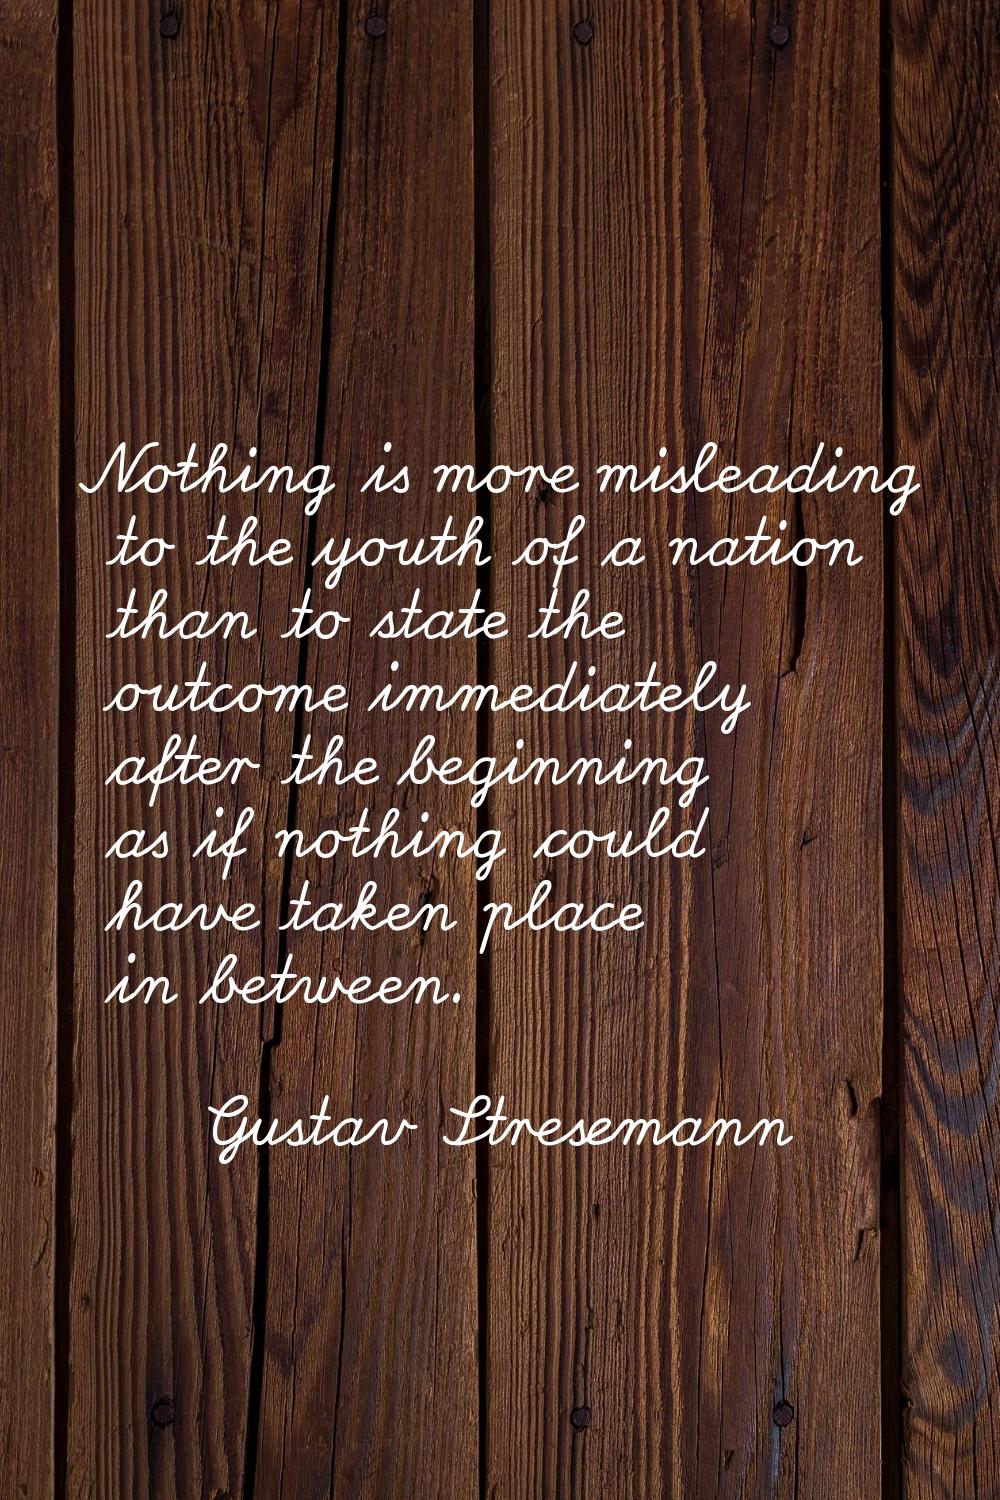 Nothing is more misleading to the youth of a nation than to state the outcome immediately after the